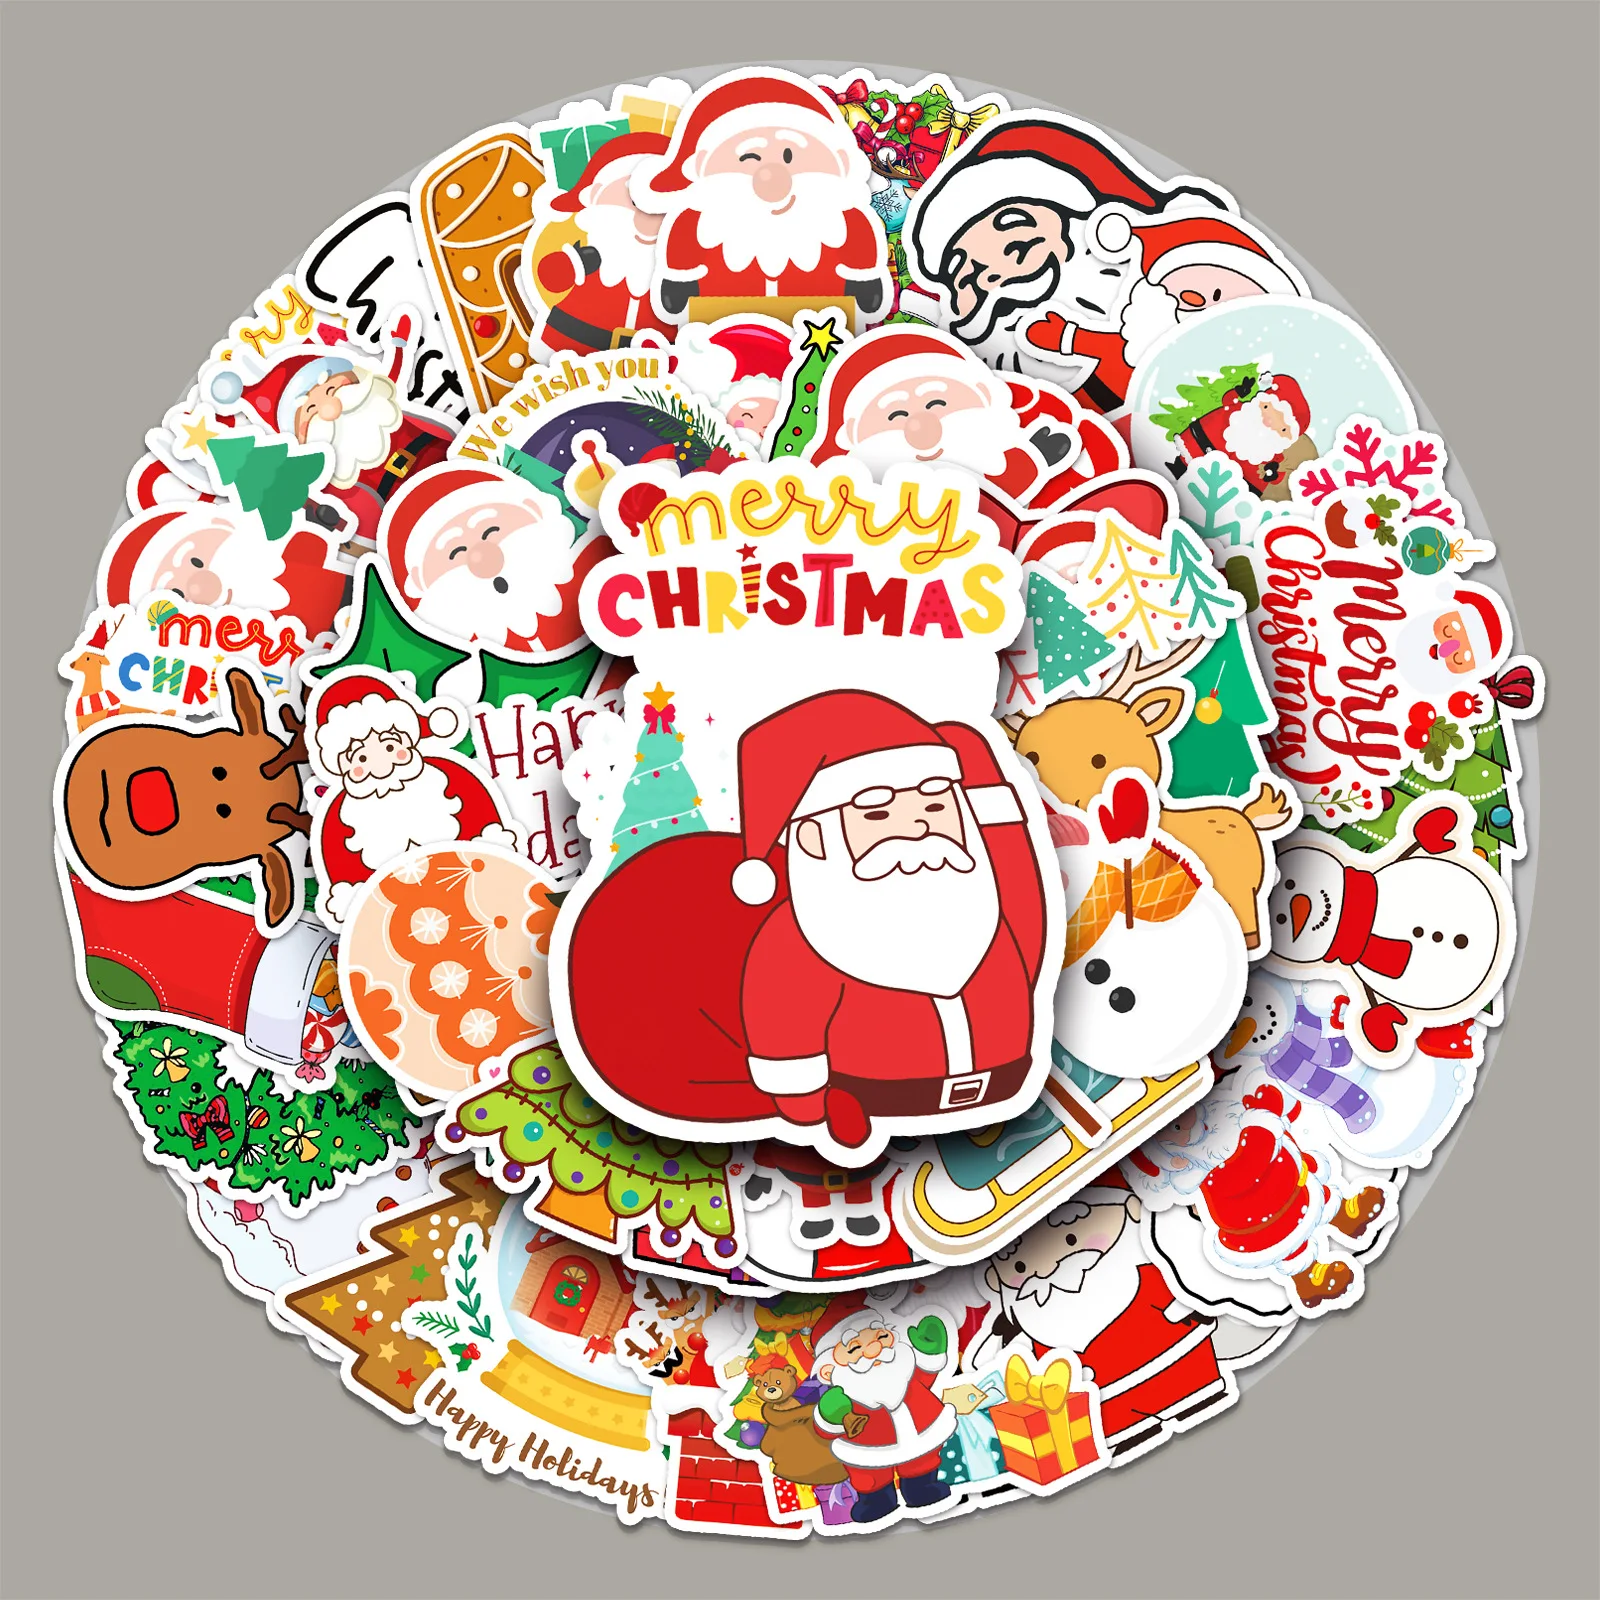 

50 Christmas Holiday Skateboards Cartoon Stickers Cute Waterproof Kids Toys Stationery Decorative Mobile DIY Craft Label Decals